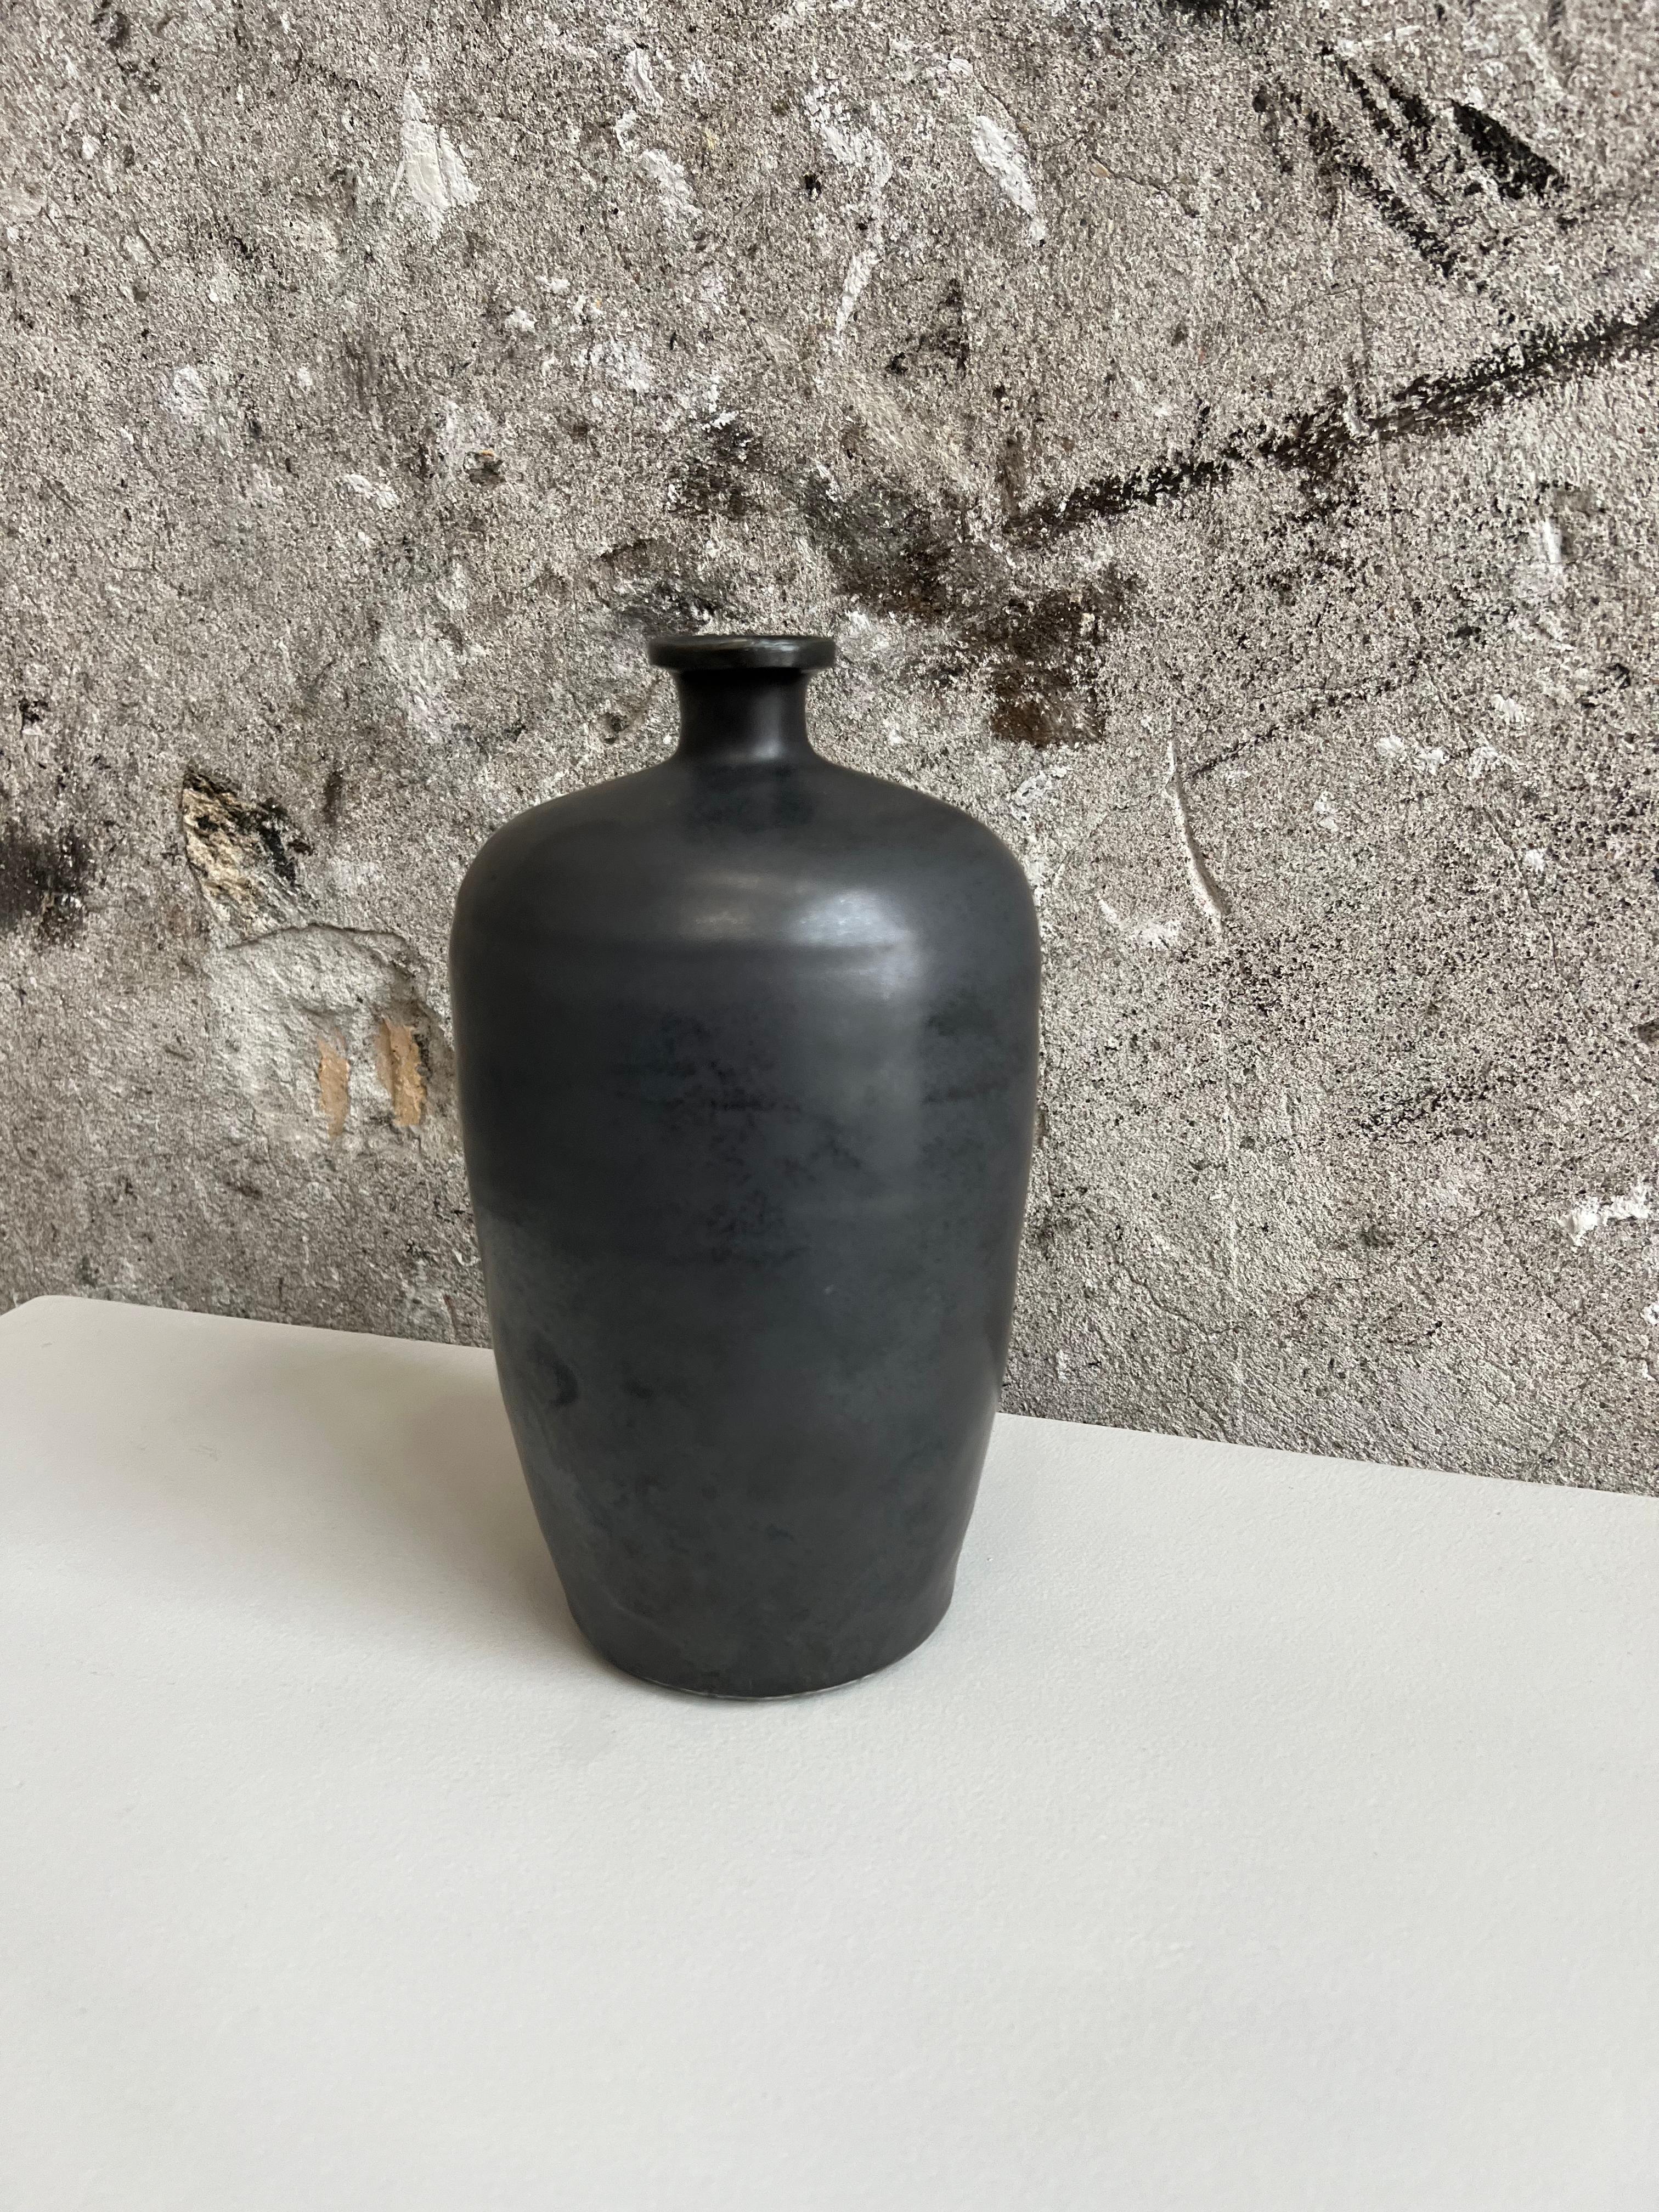 Beautiful, sleek, glazed stoneware vase in charcoal black color. Taking inspiration from traditional pots seen in old movies, this vase gives an antique feel but with a modern and minimalistic look.  Can be used both functionally and aesthetically. 